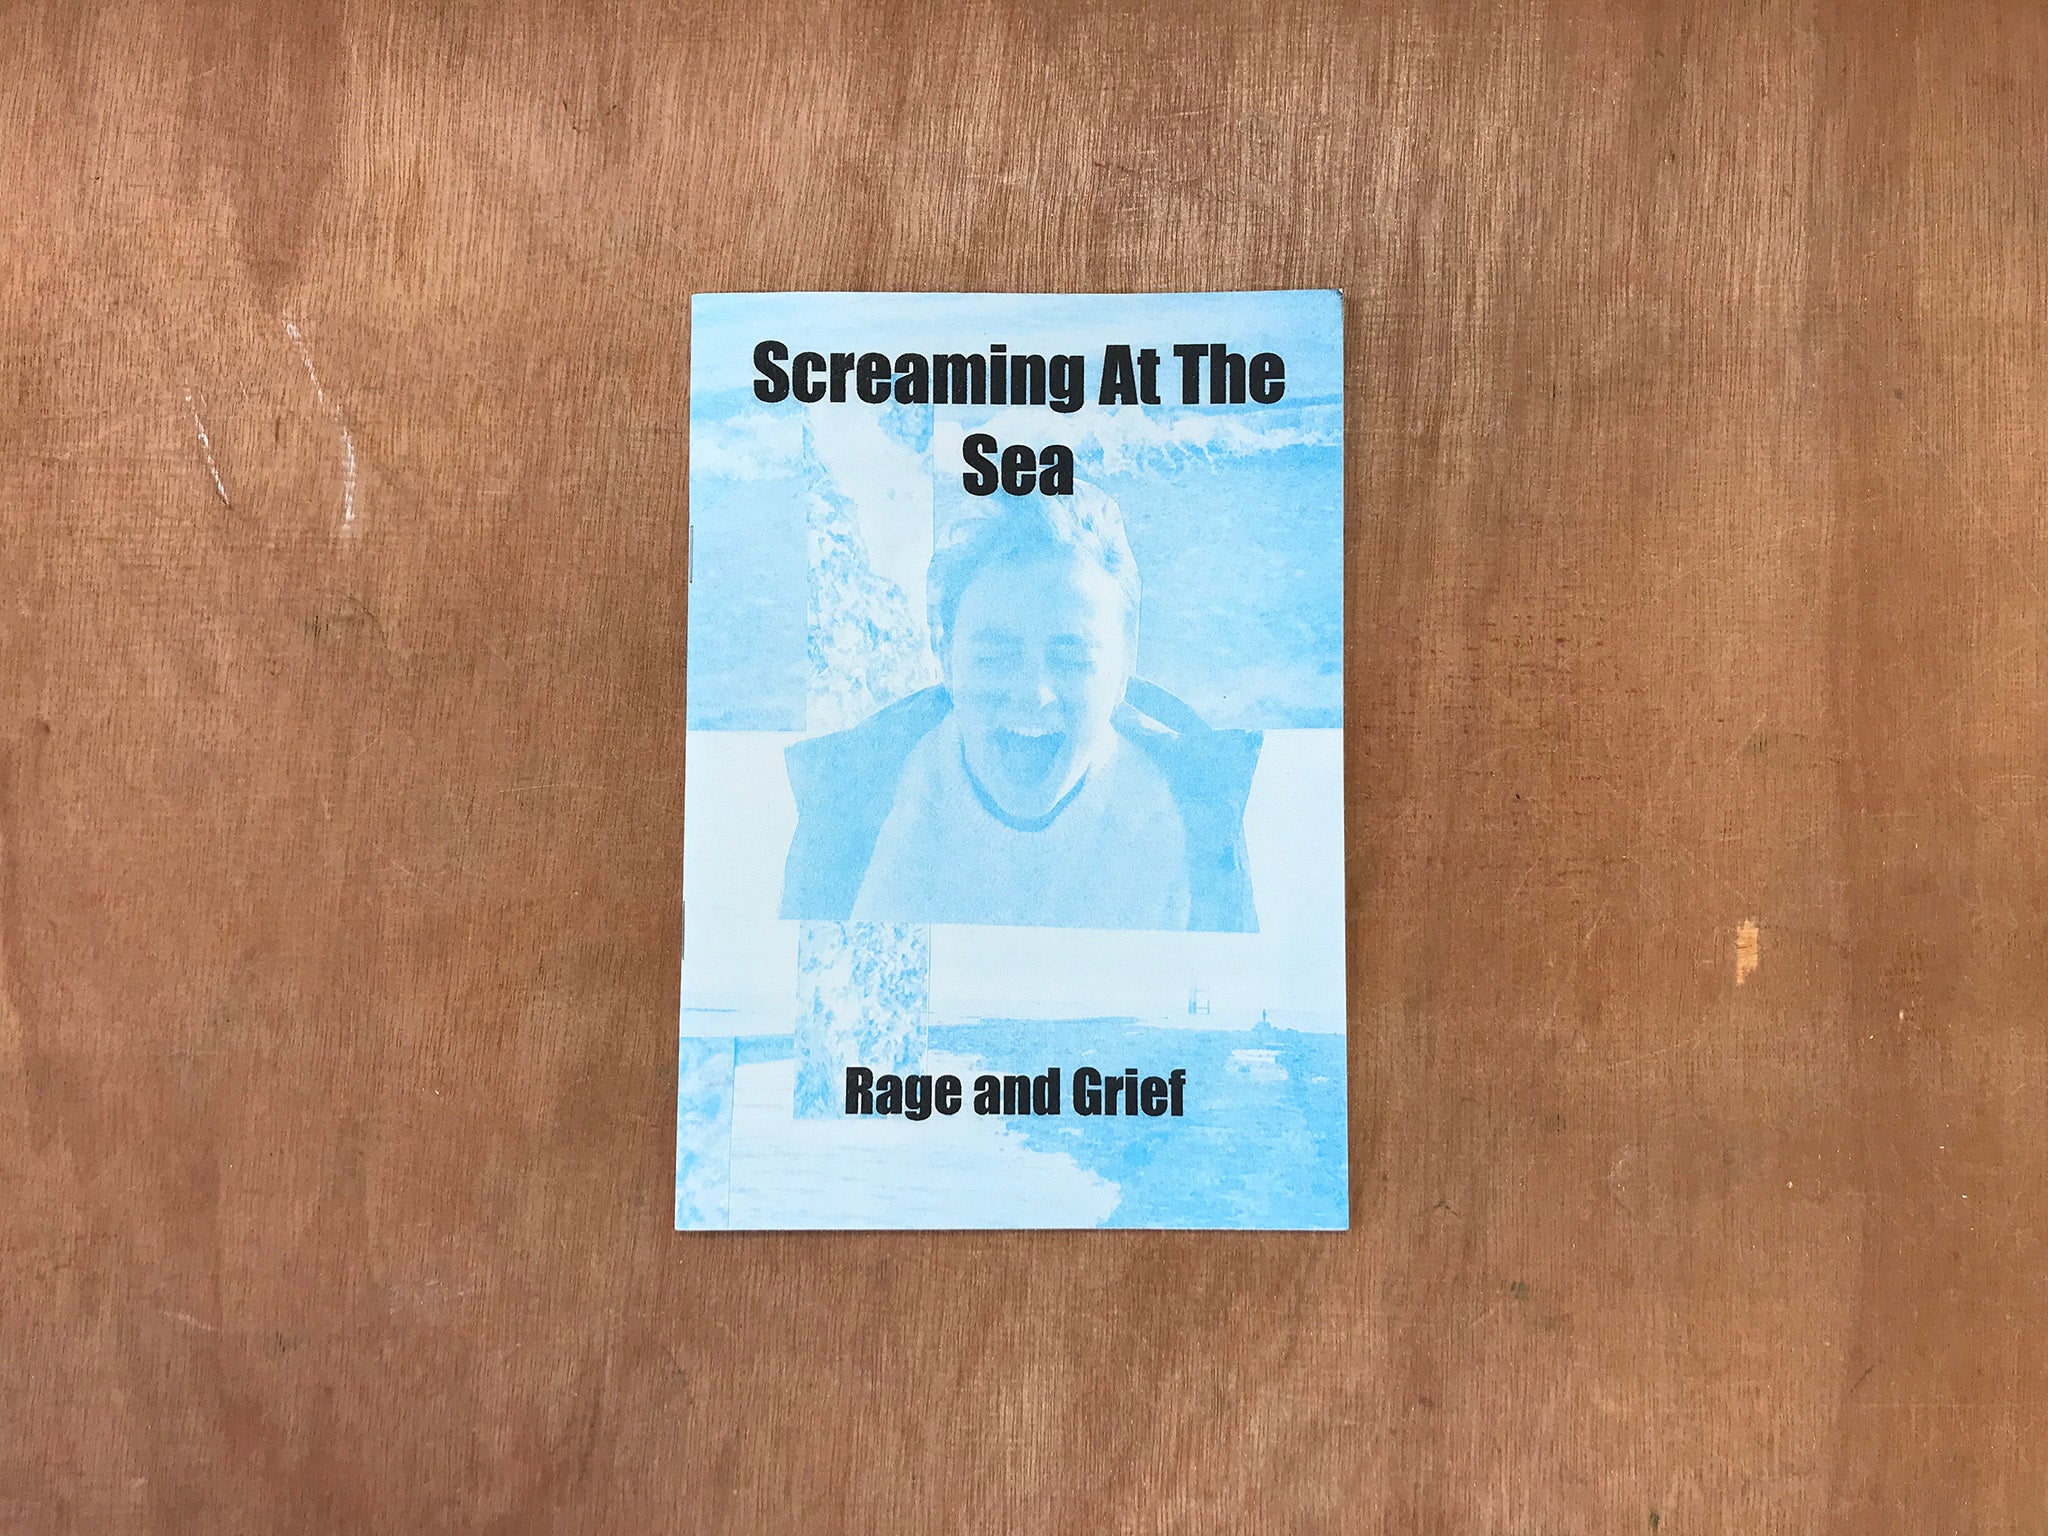 SCREAMING AT THE SEA: RAGE AND GRIEF by Greta Sharp